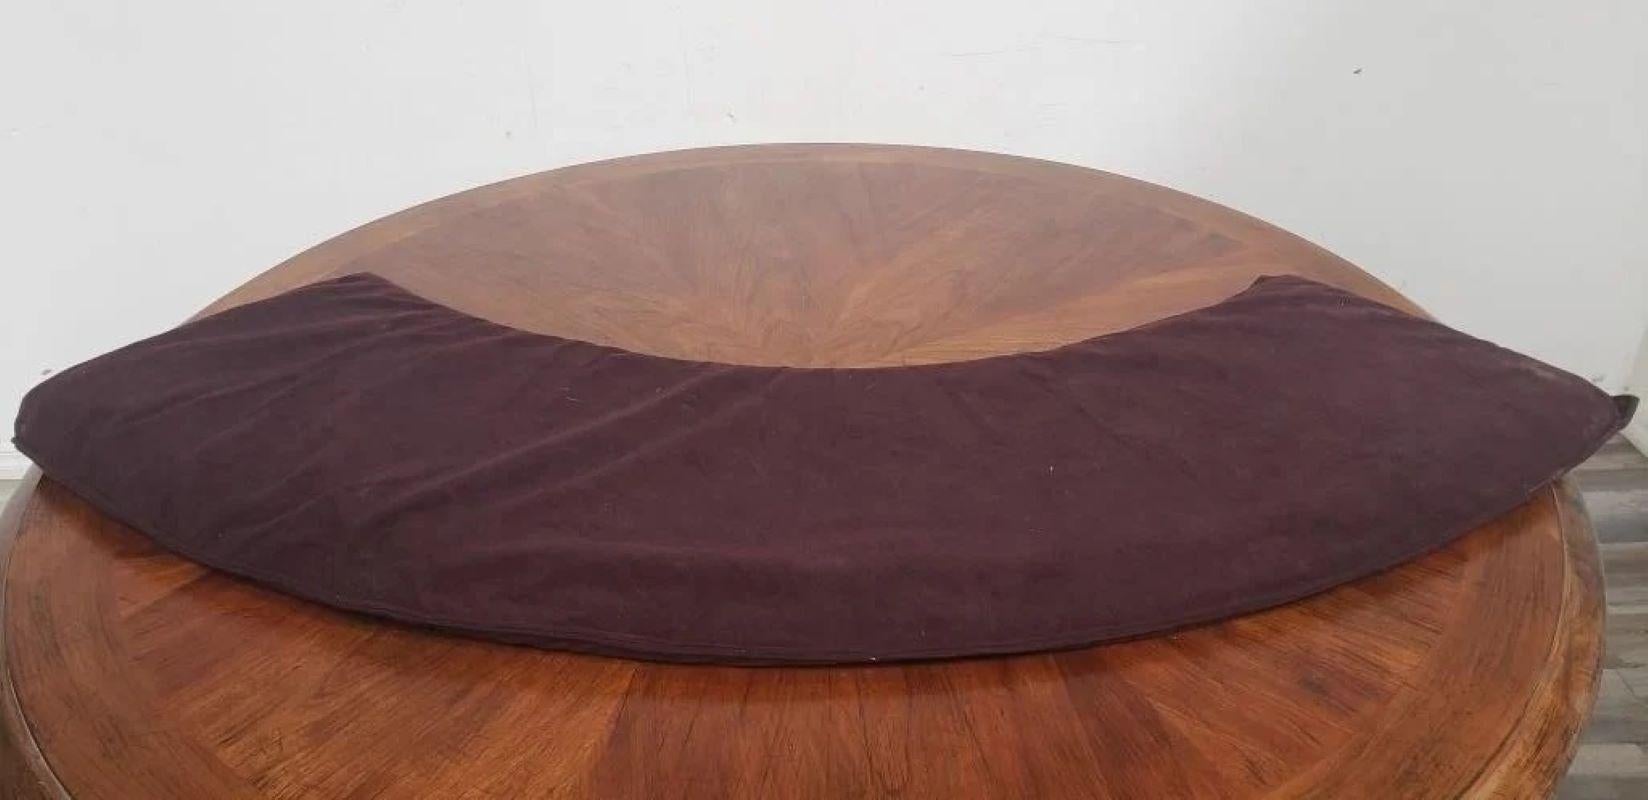 Extendable Round Walnut dinning table and game table With 4 leaves. Each leave is sleeved for protection ( four leaves in total. and connects to one another to be placed over the center table. The outside diameter of the table. 57 diam x 31h With